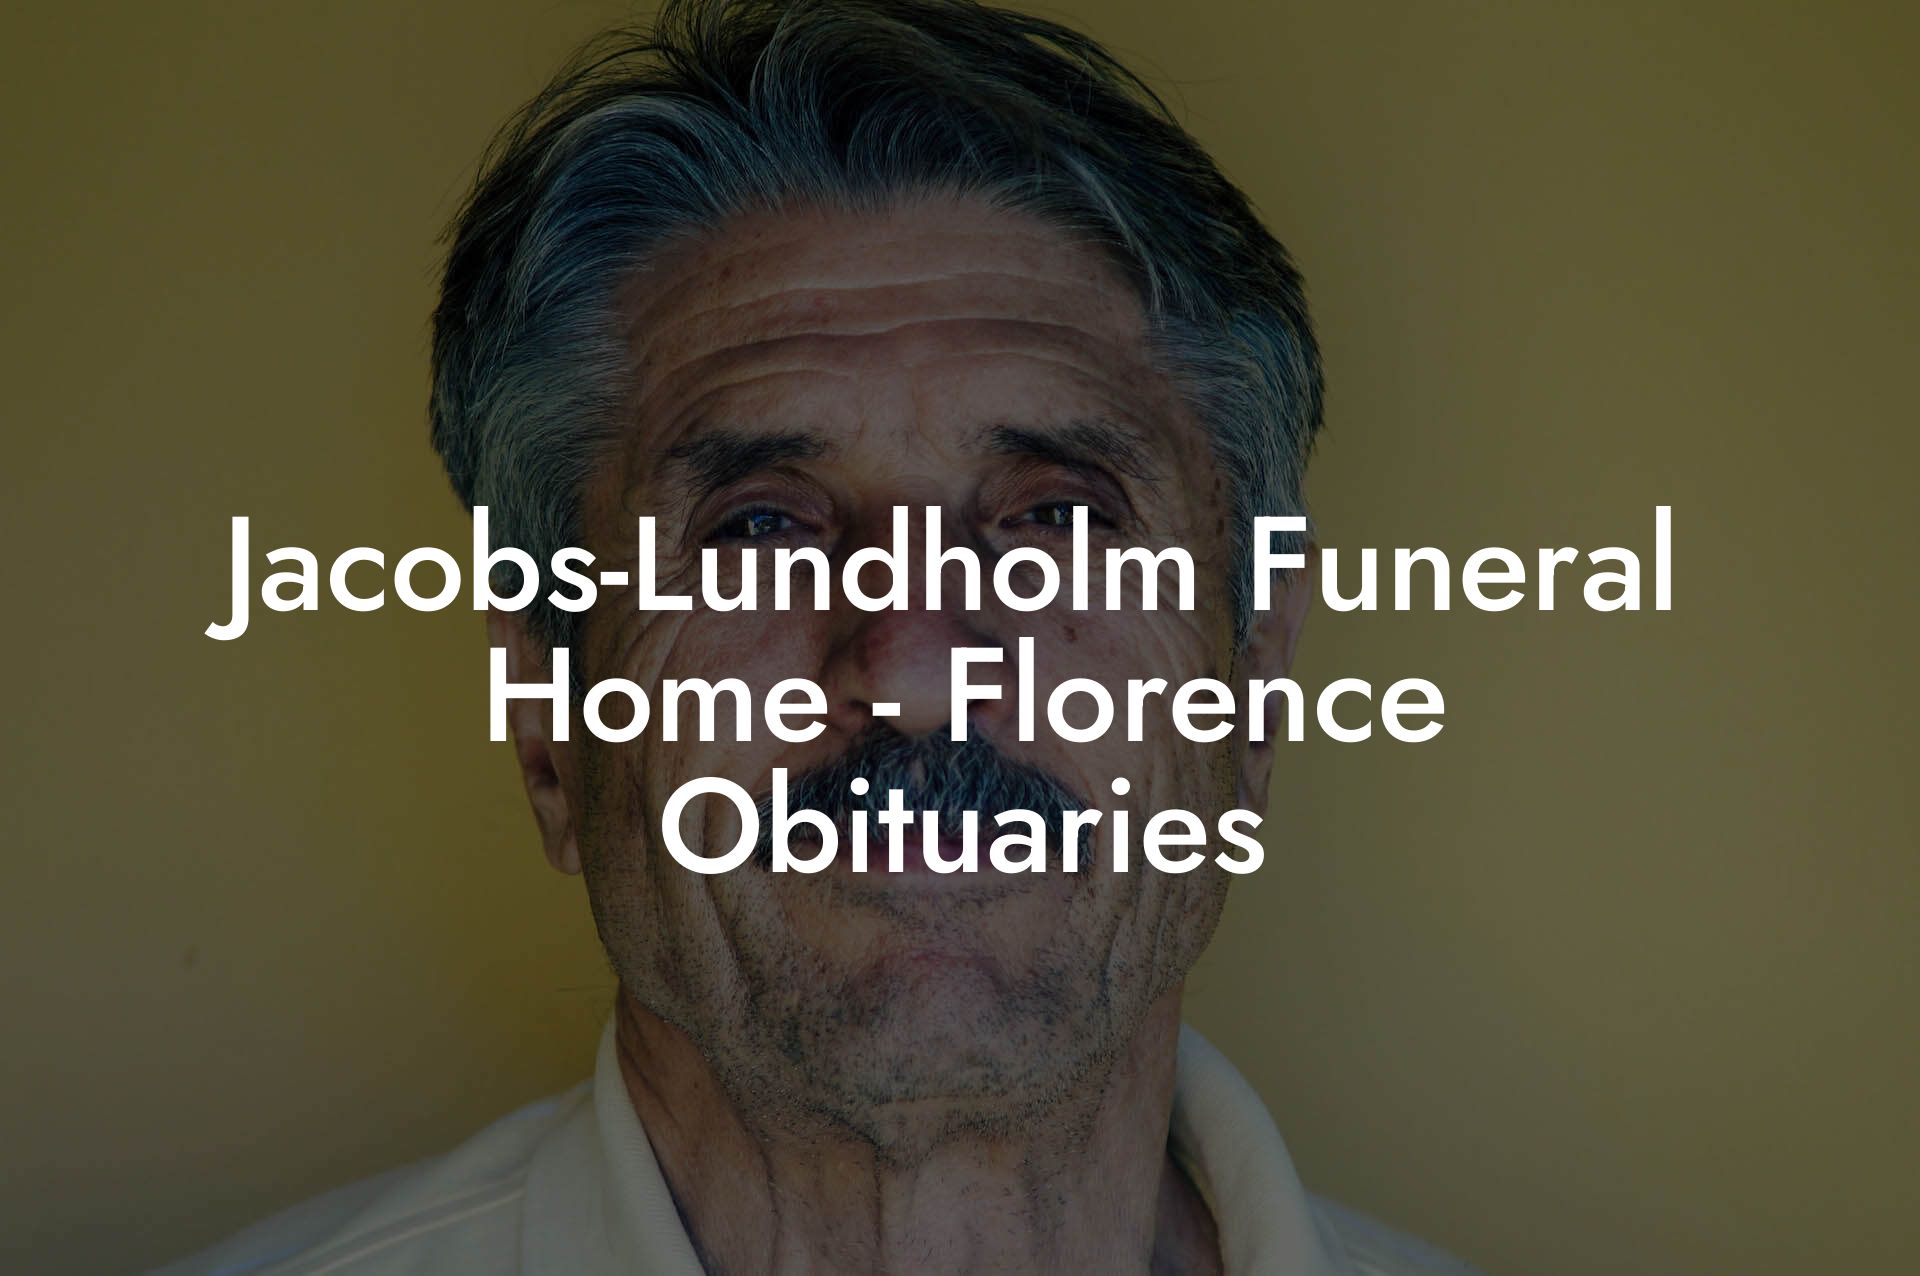 Jacobs-Lundholm Funeral Home - Florence Obituaries